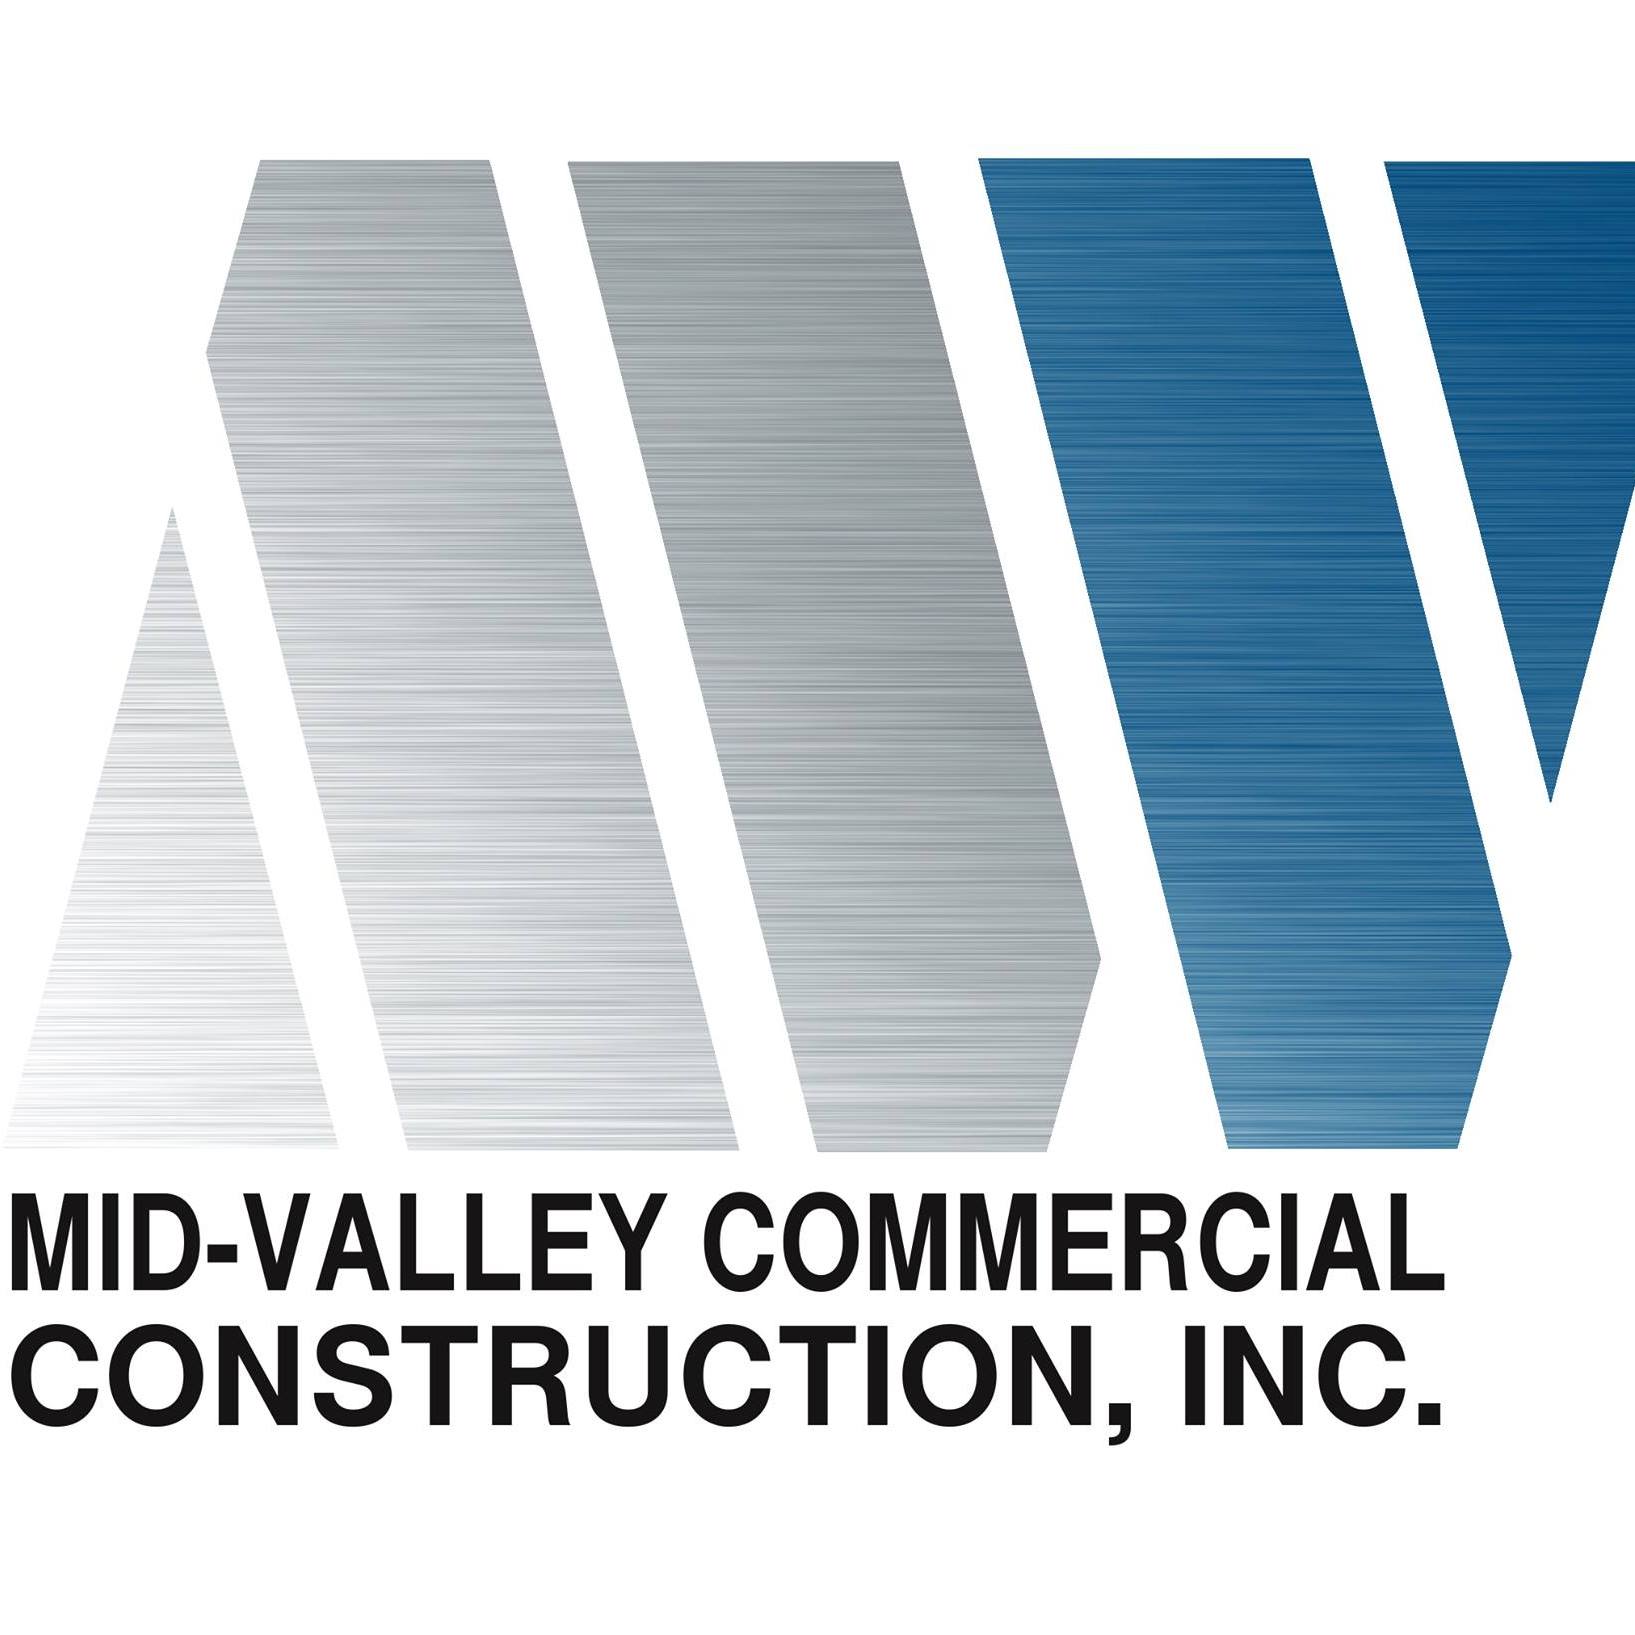 Company logo of Mid-Valley Commercial Construction, Inc.